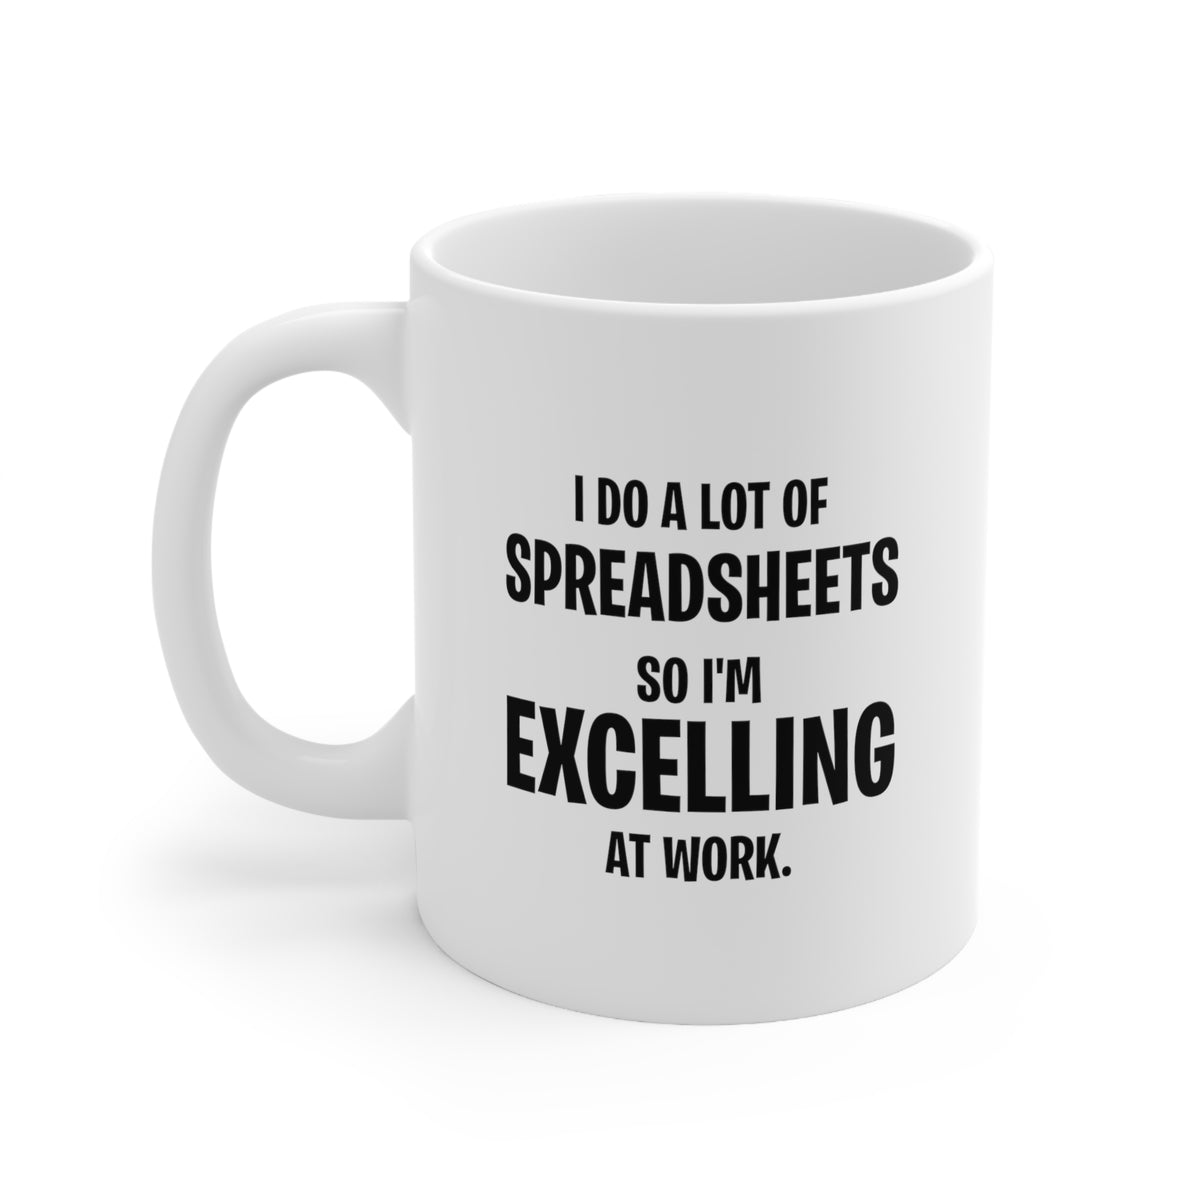 Funny Accountant Gifts, I do a lot of spreadsheets, so I'm excelling at work, Sarcasm Coffee Mug For Women Men Tax Accountanting